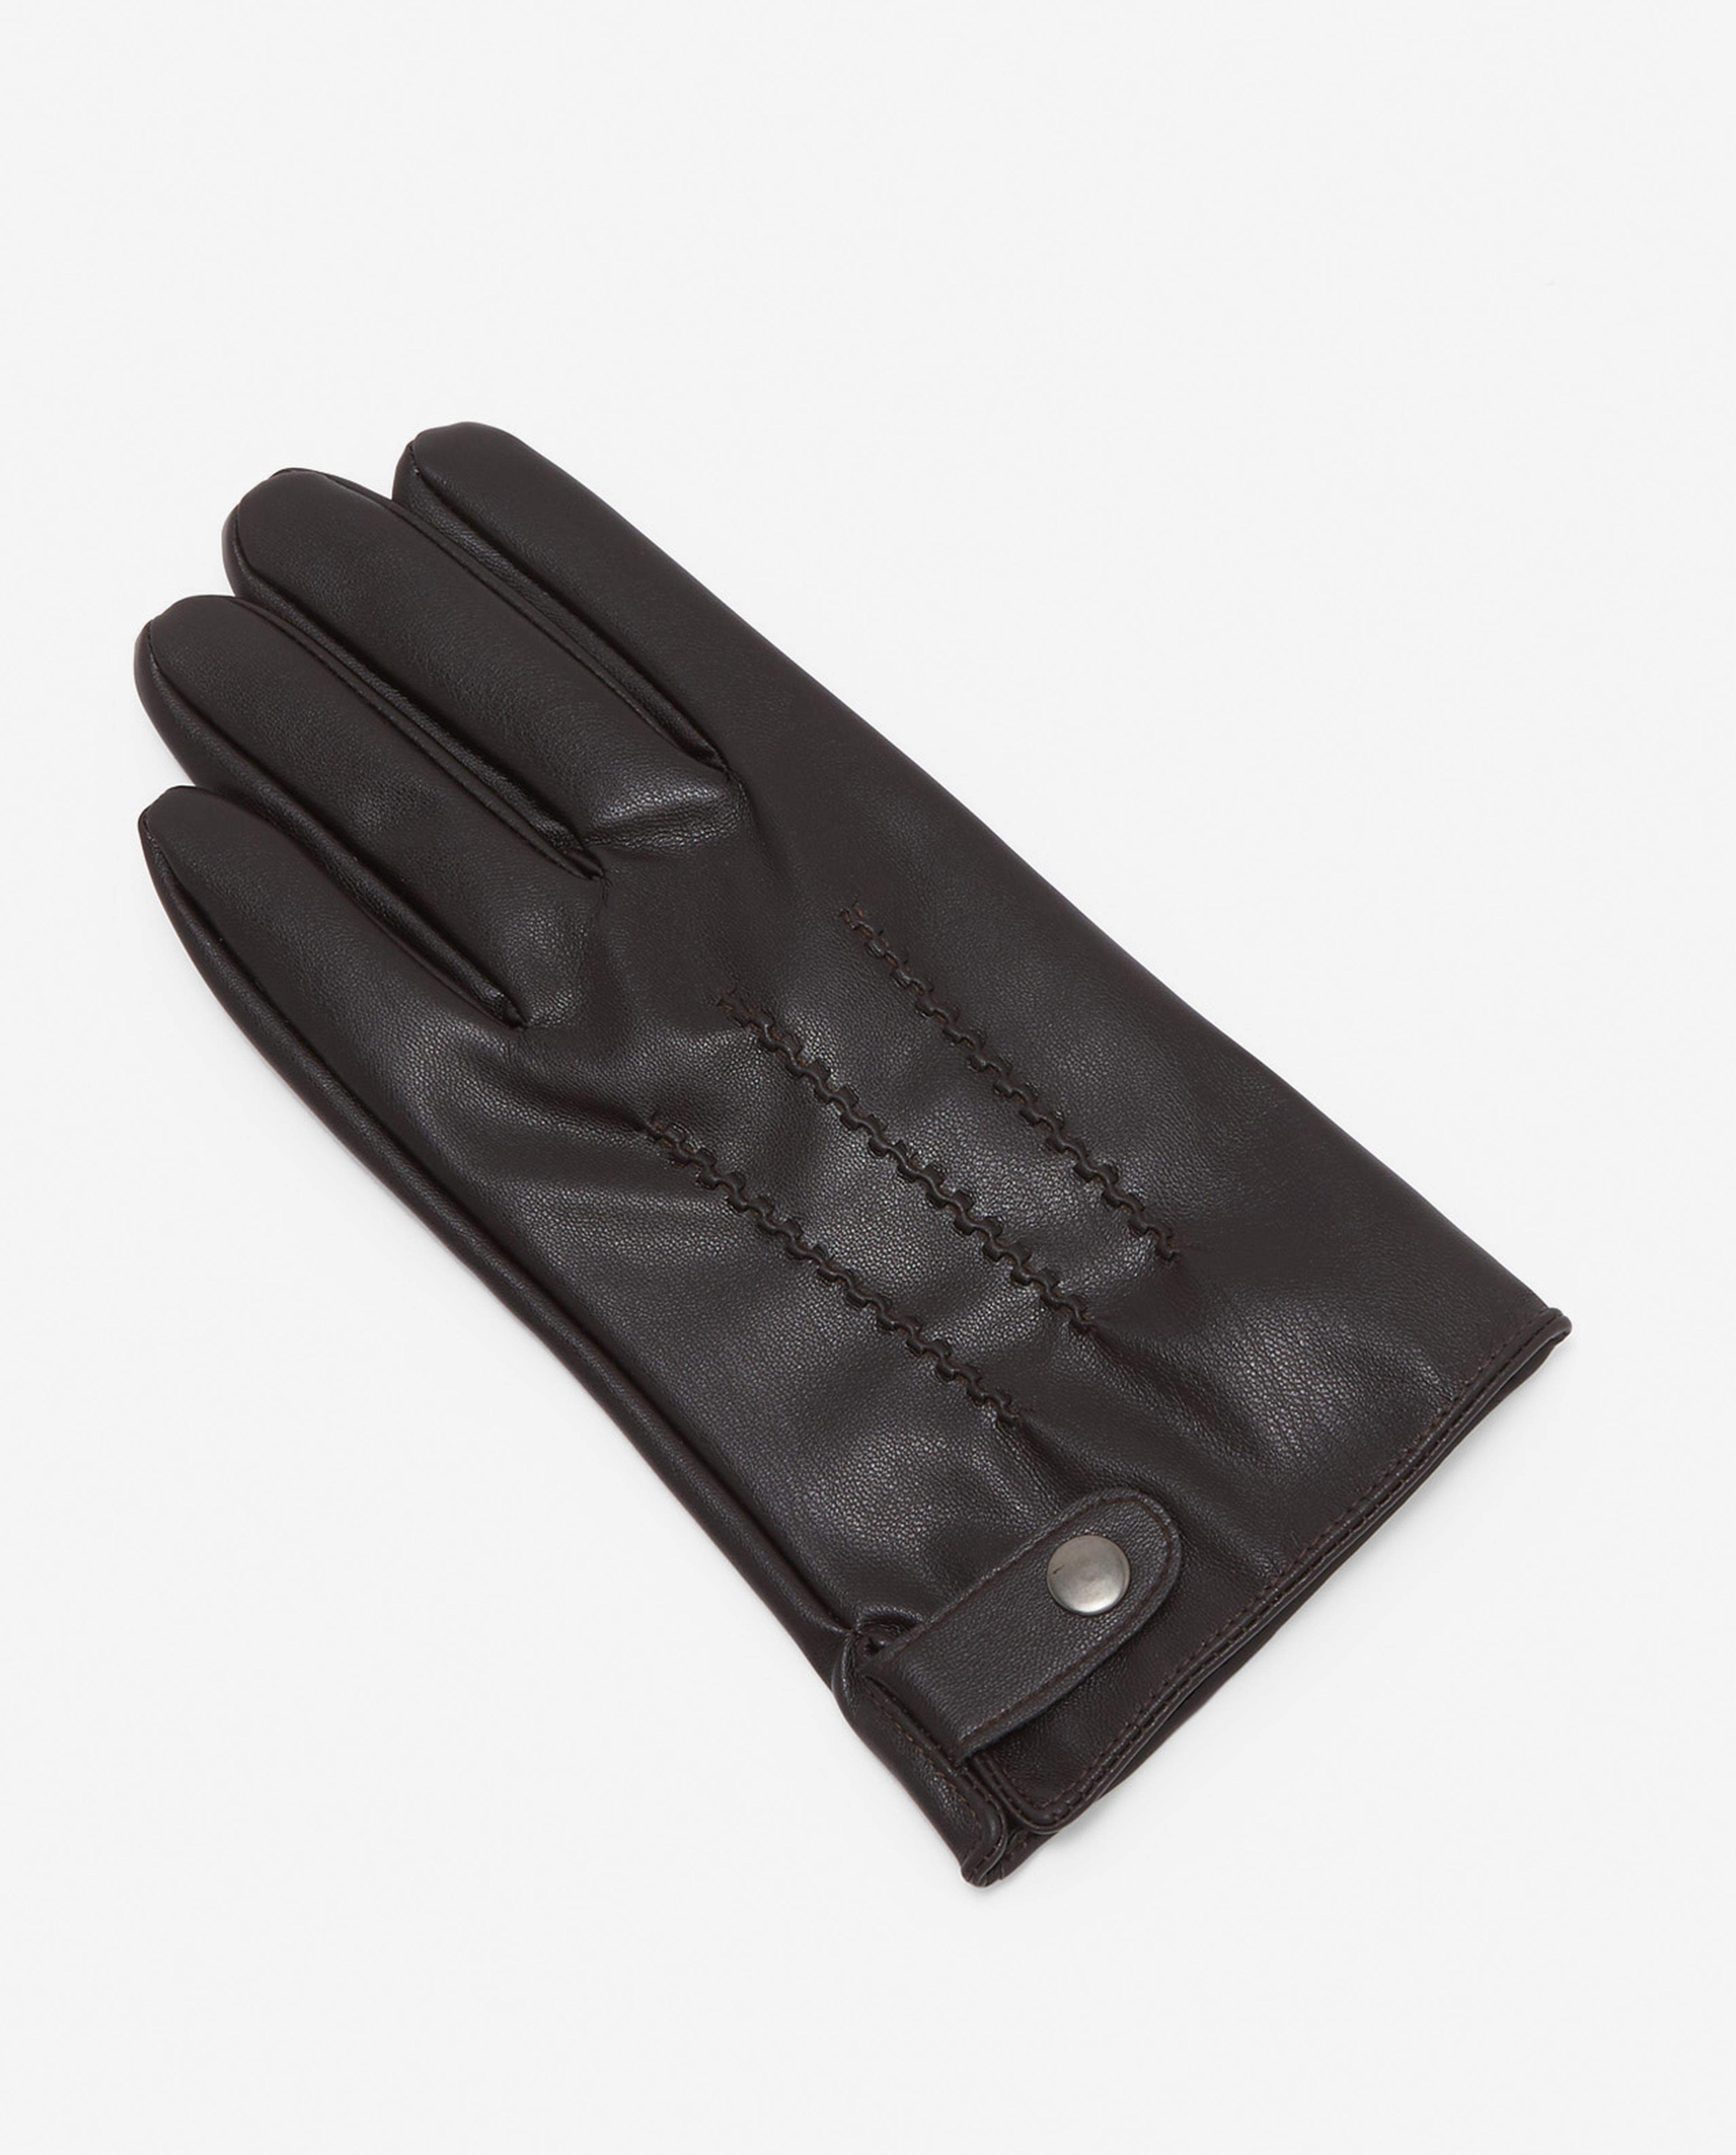 Solid PU Leather Gloves